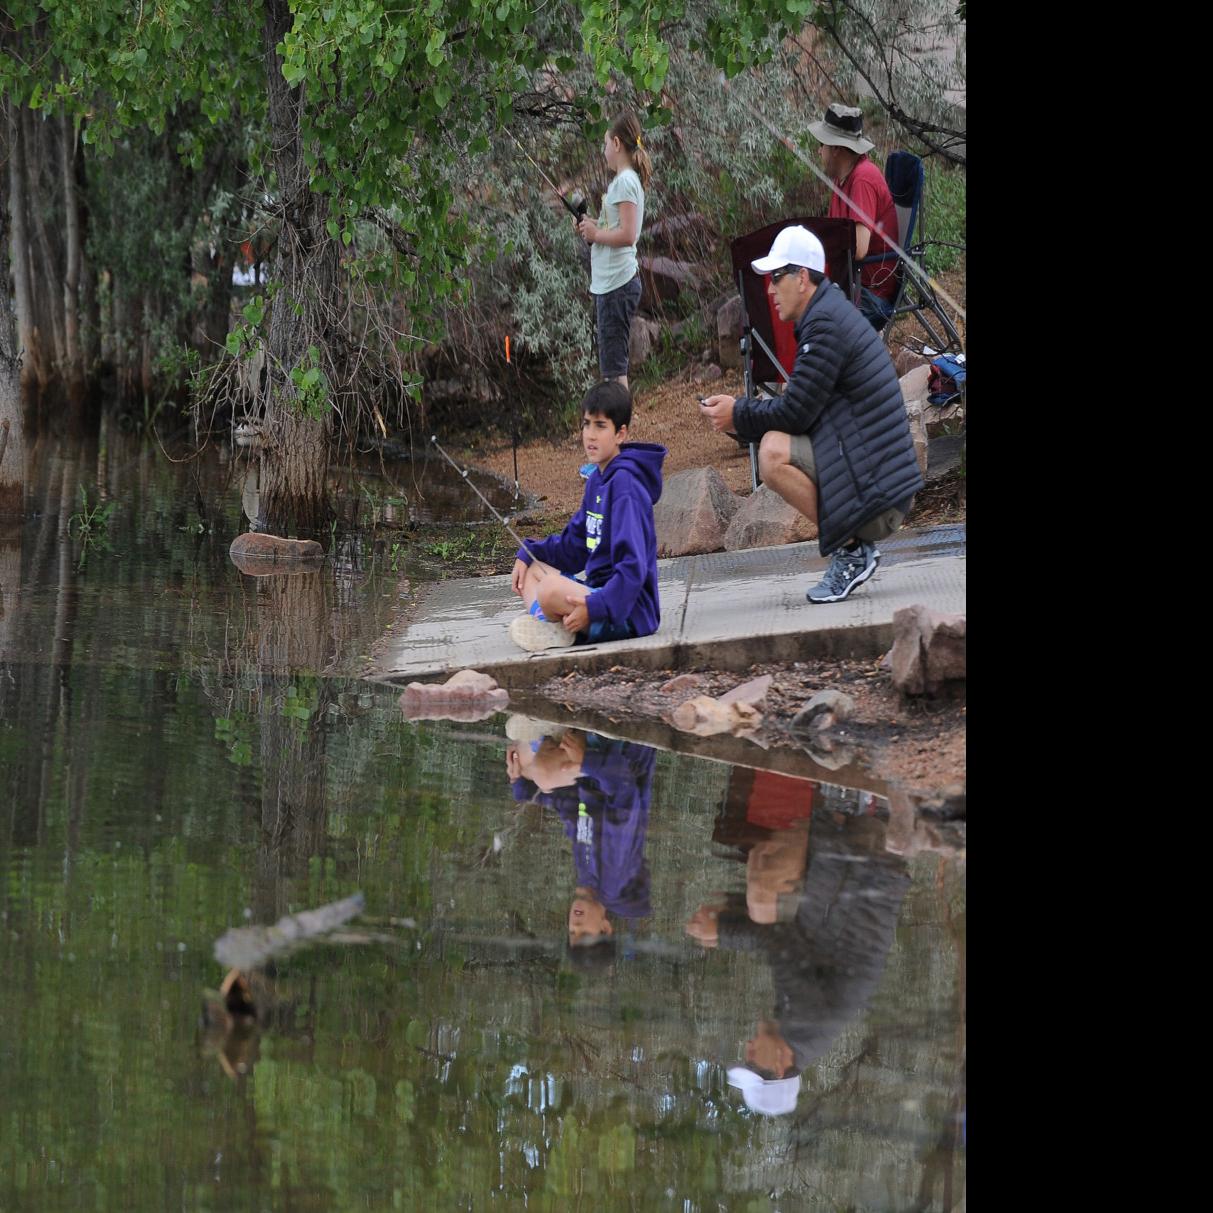 First ever Pikes Peak Youth Fishing Derby happening on Saturday